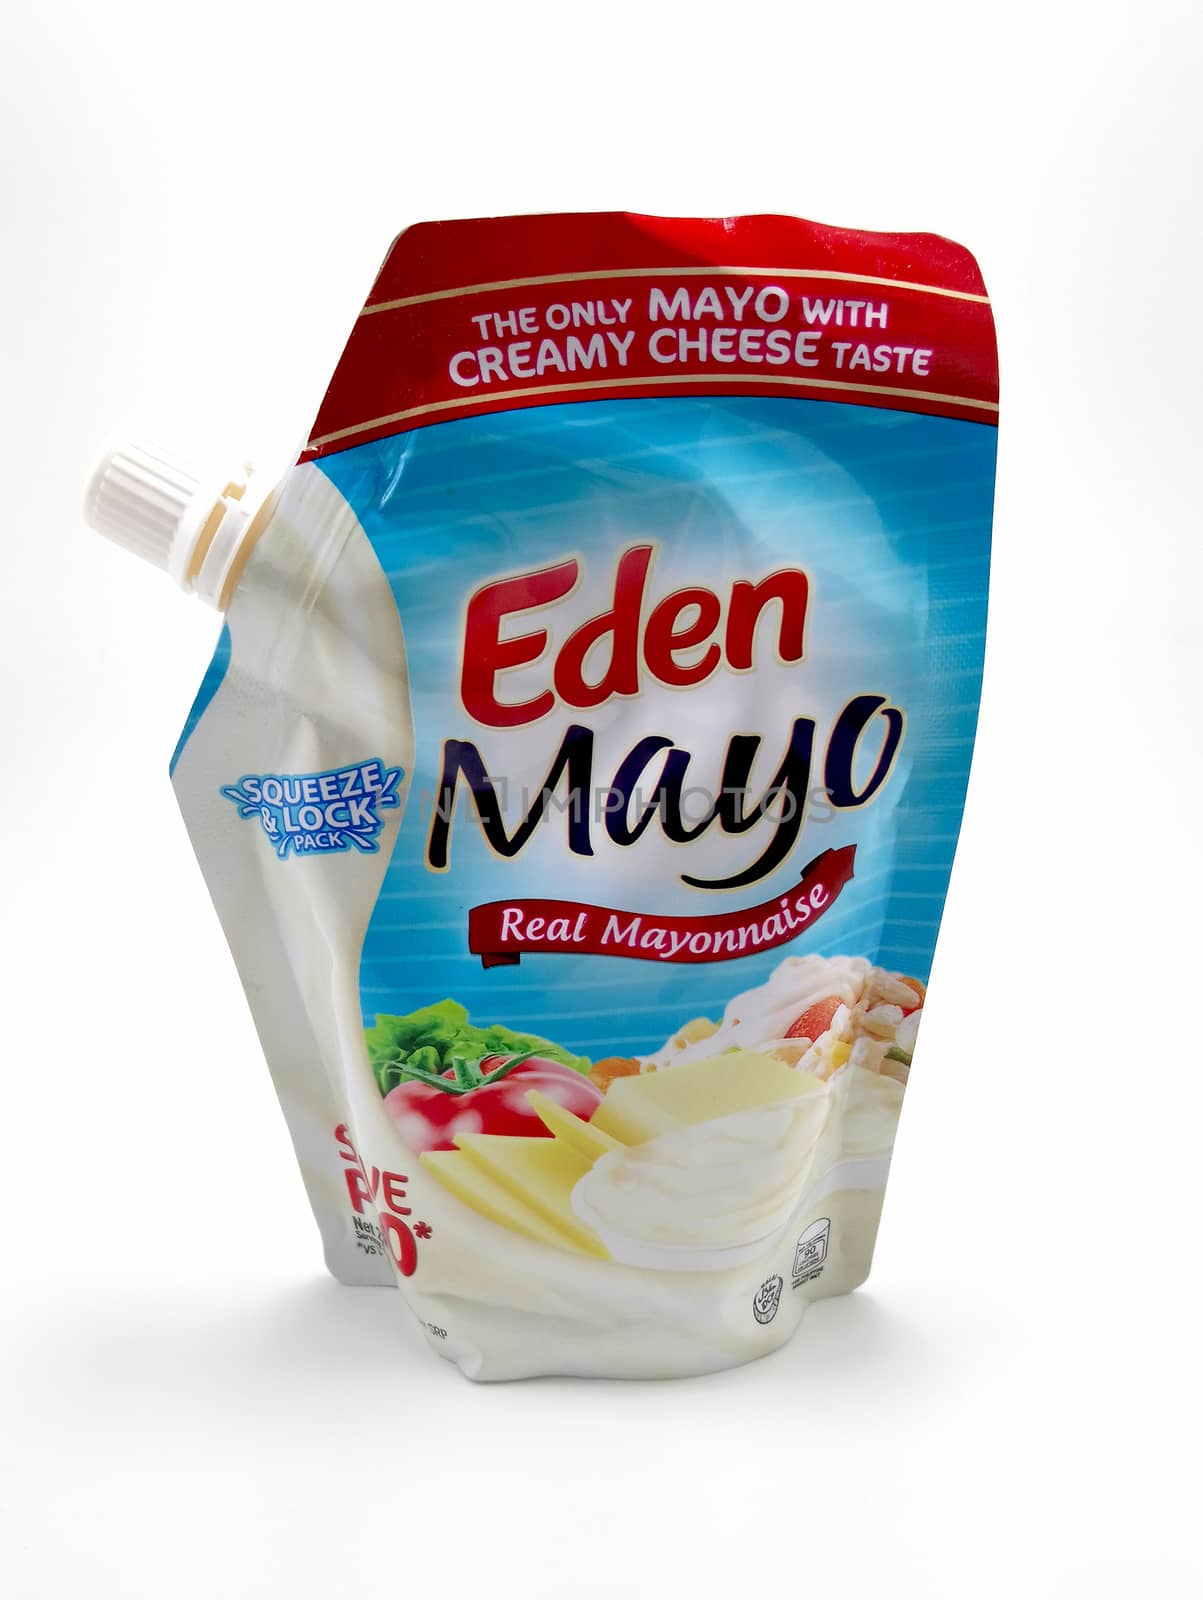 MANILA, PH - JUNE 23 - Eden mayo real mayonnaise pack on June 23, 2020 in Manila, Philippines.